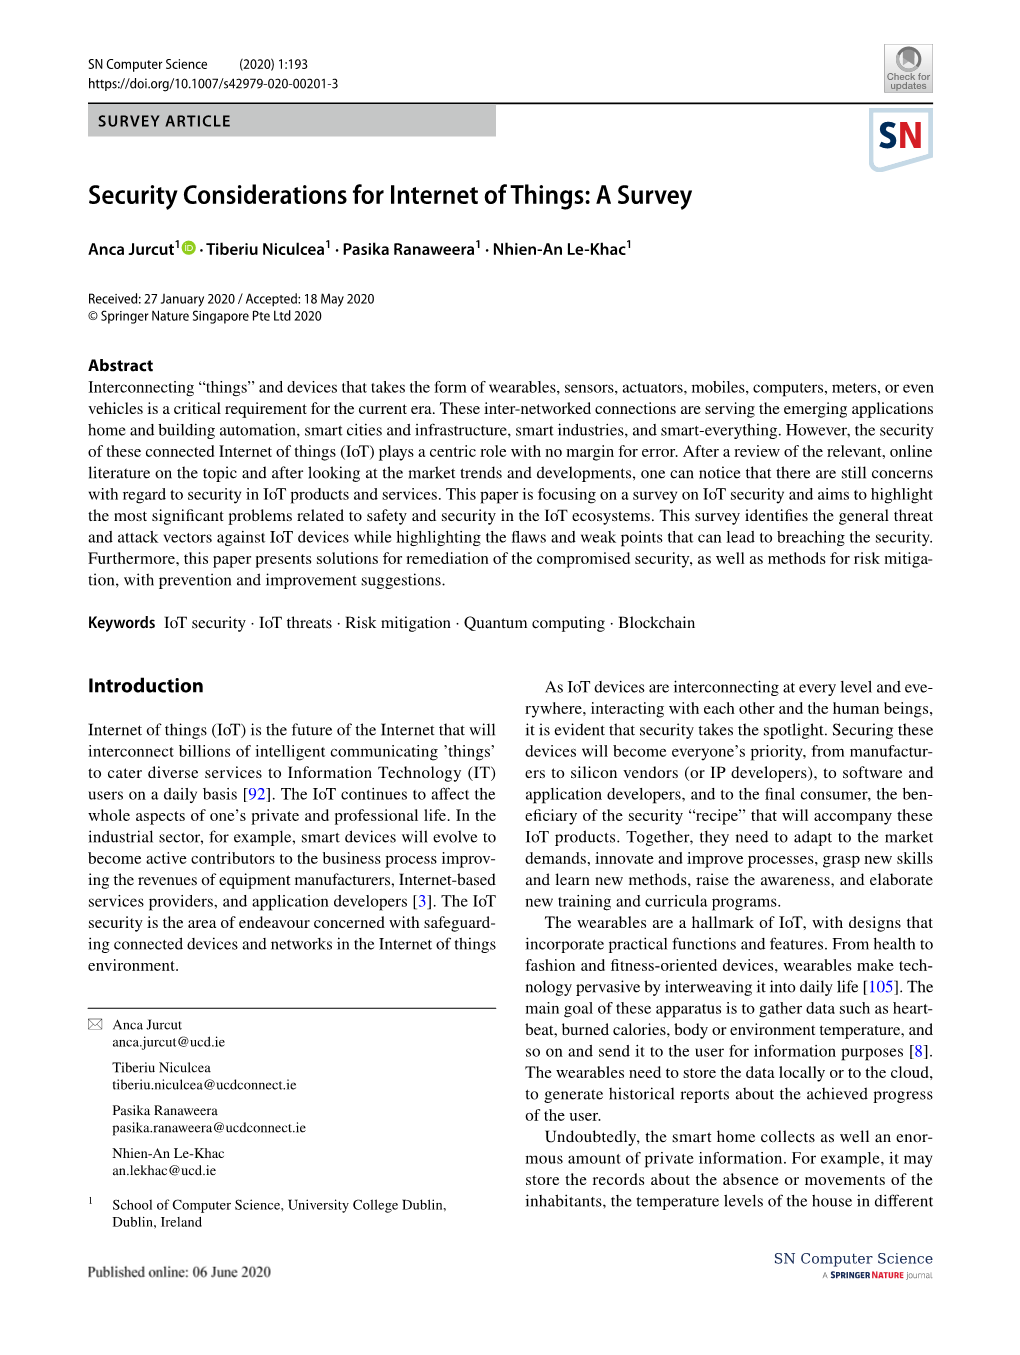 Security Considerations for Internet of Things: a Survey